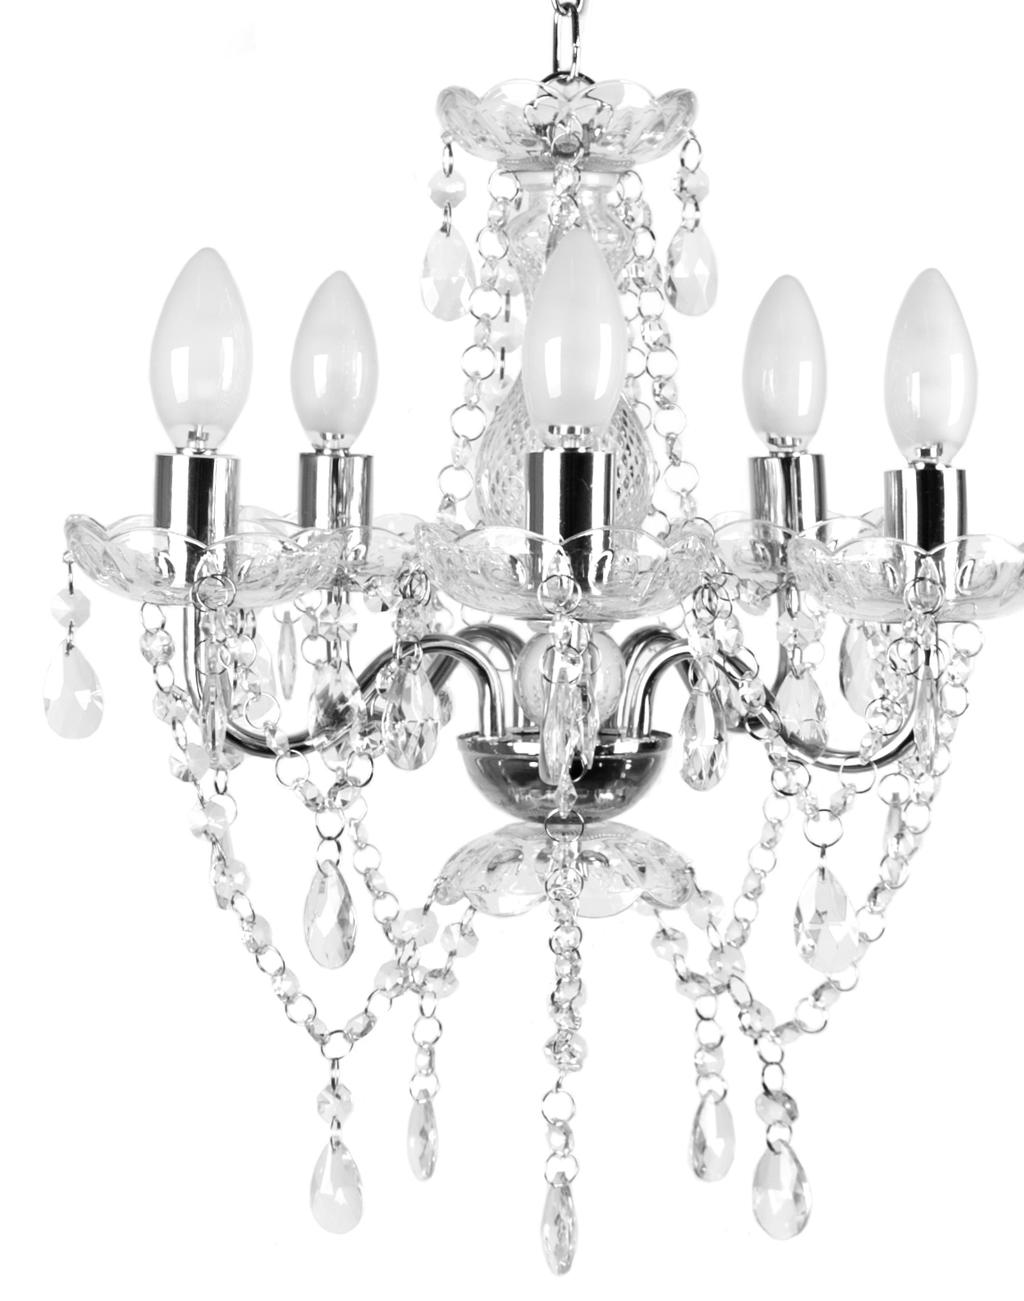 2018 lighting collection A lovely Chandelier Collection to offer soft bed-side and